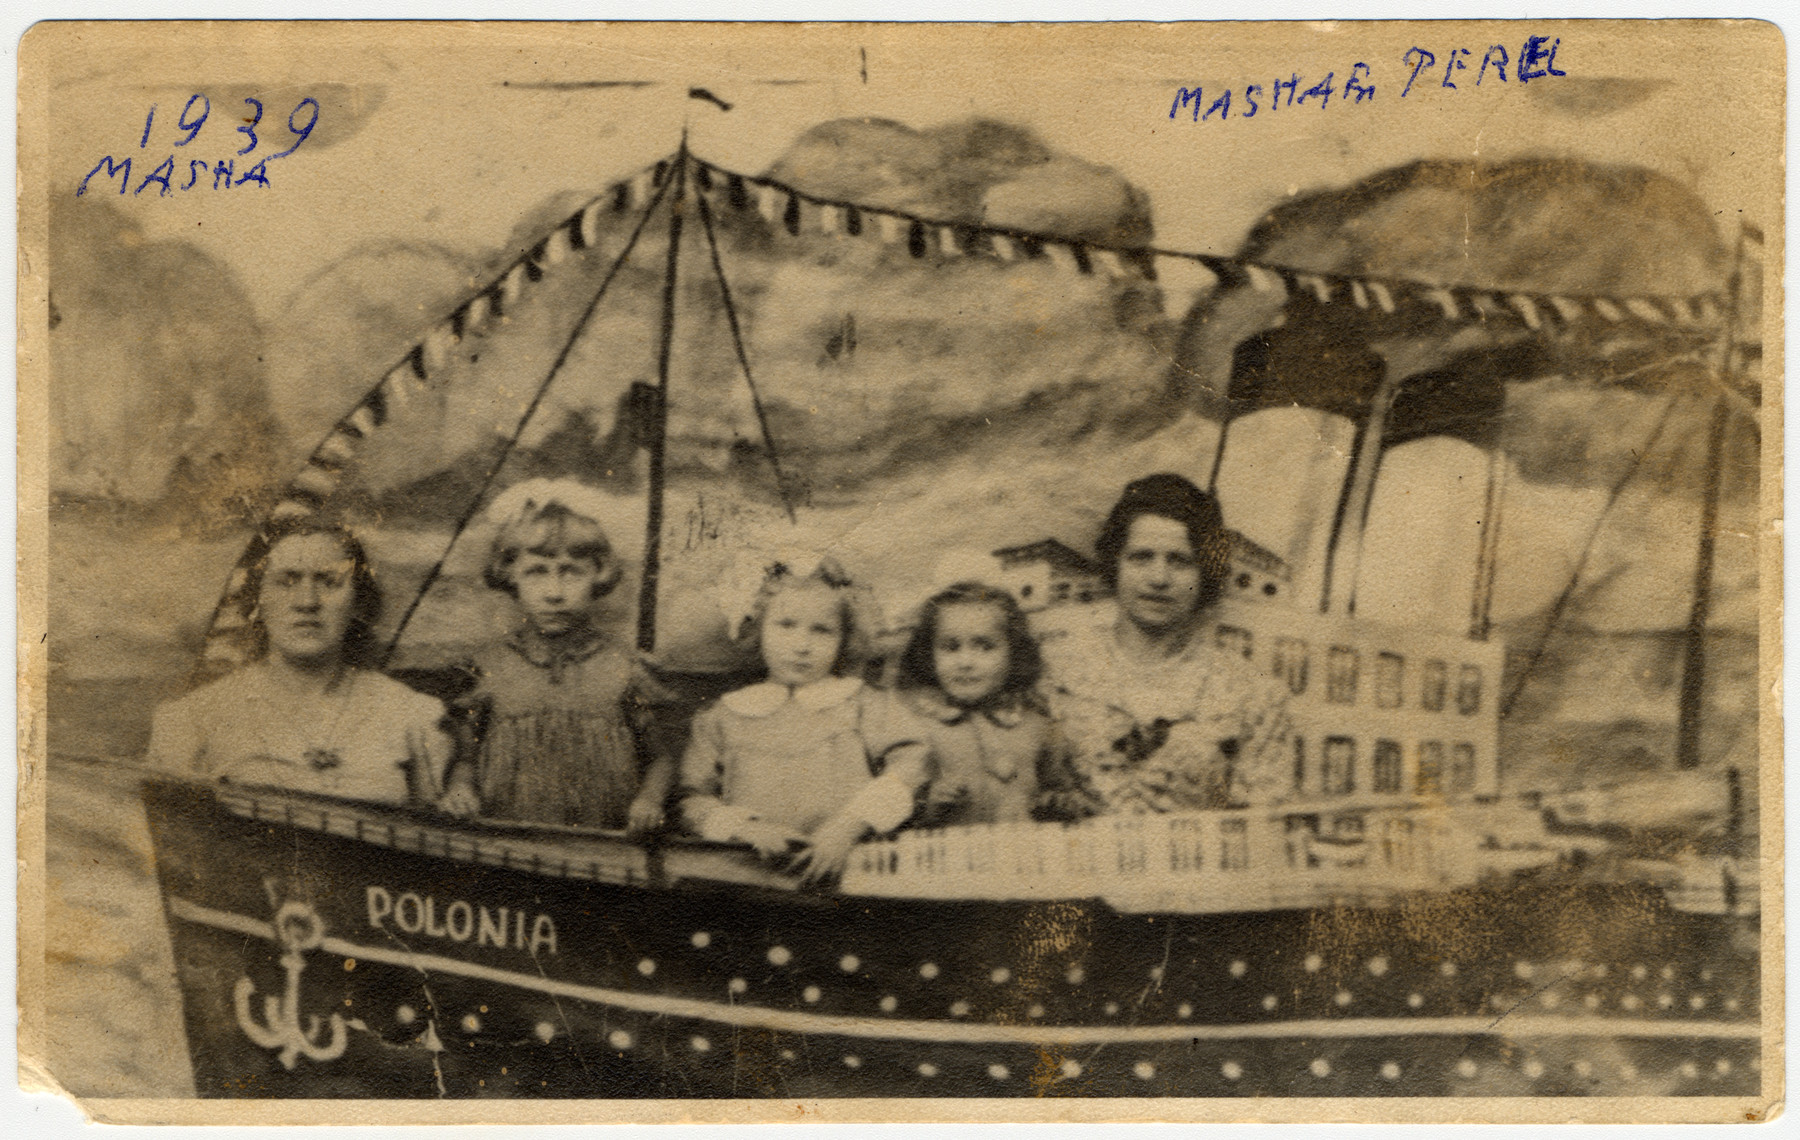 Studio portrait of women and children from Jewish family in Lodz posing against a mock boat,

The original Yiddish caption reads: